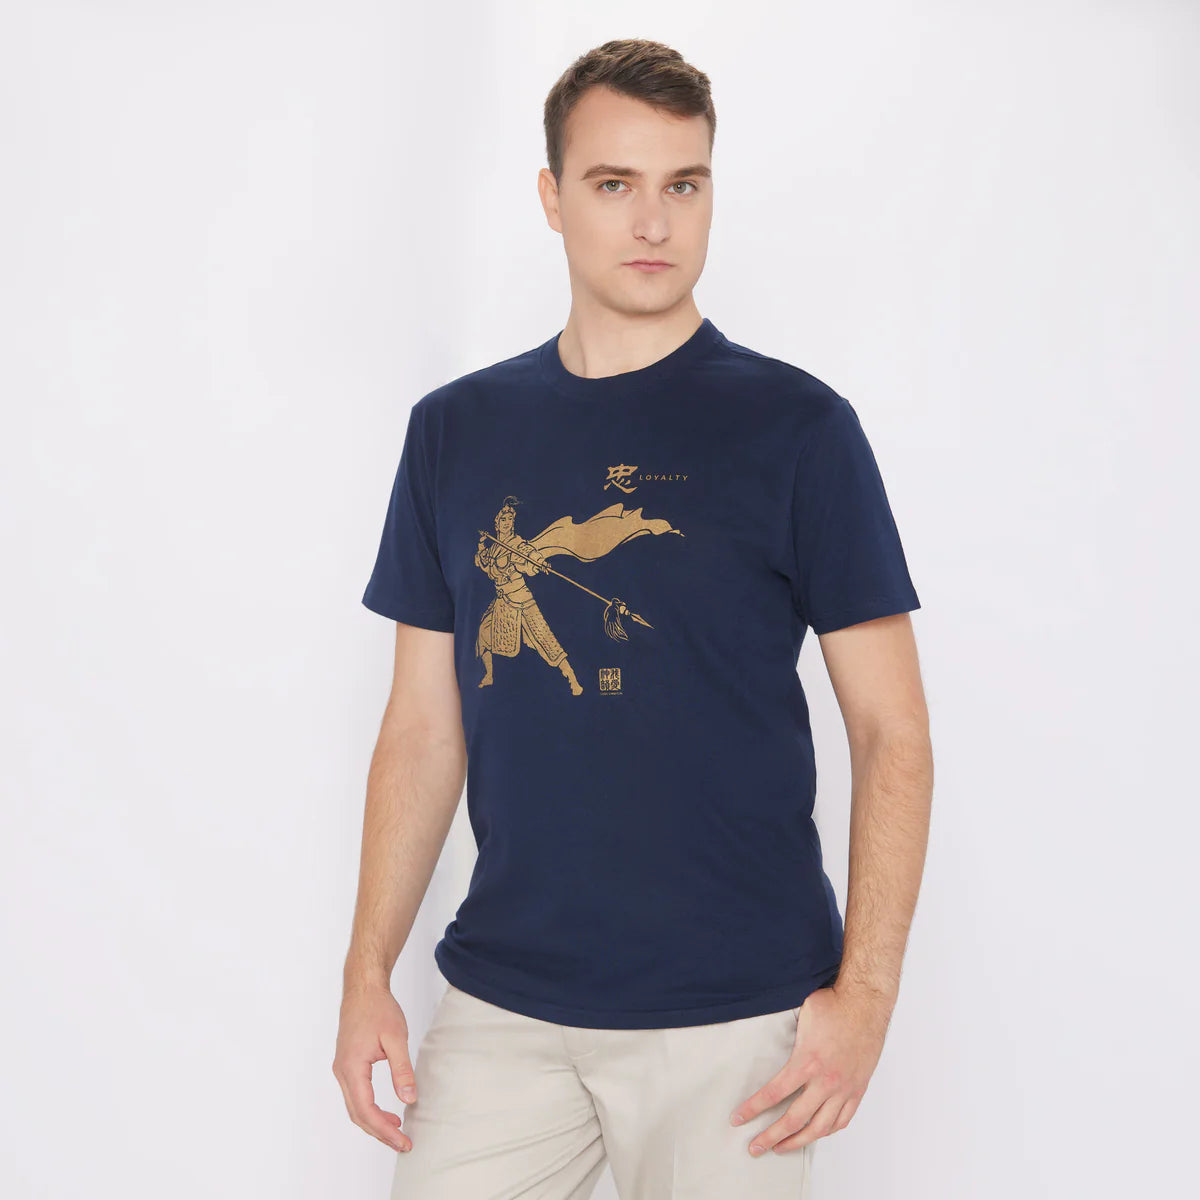 The Loyalty of Yue Fei T-shirt